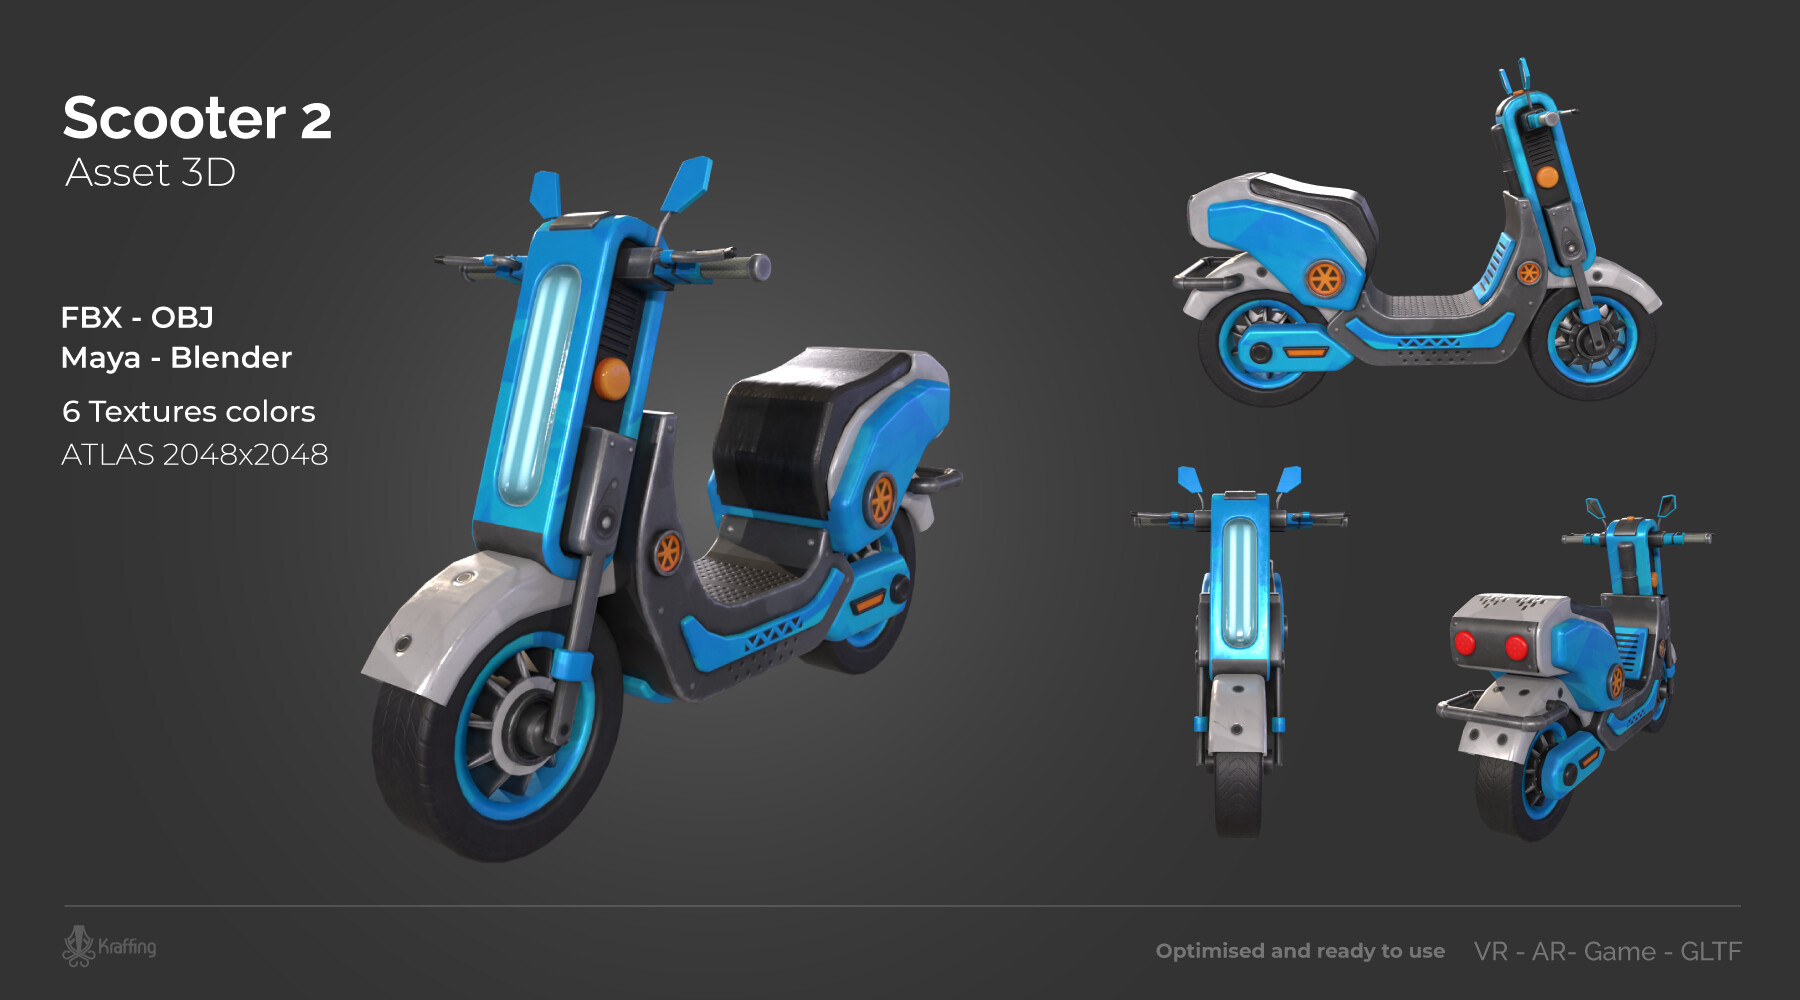 Scooter-Game auf mmofacts.com